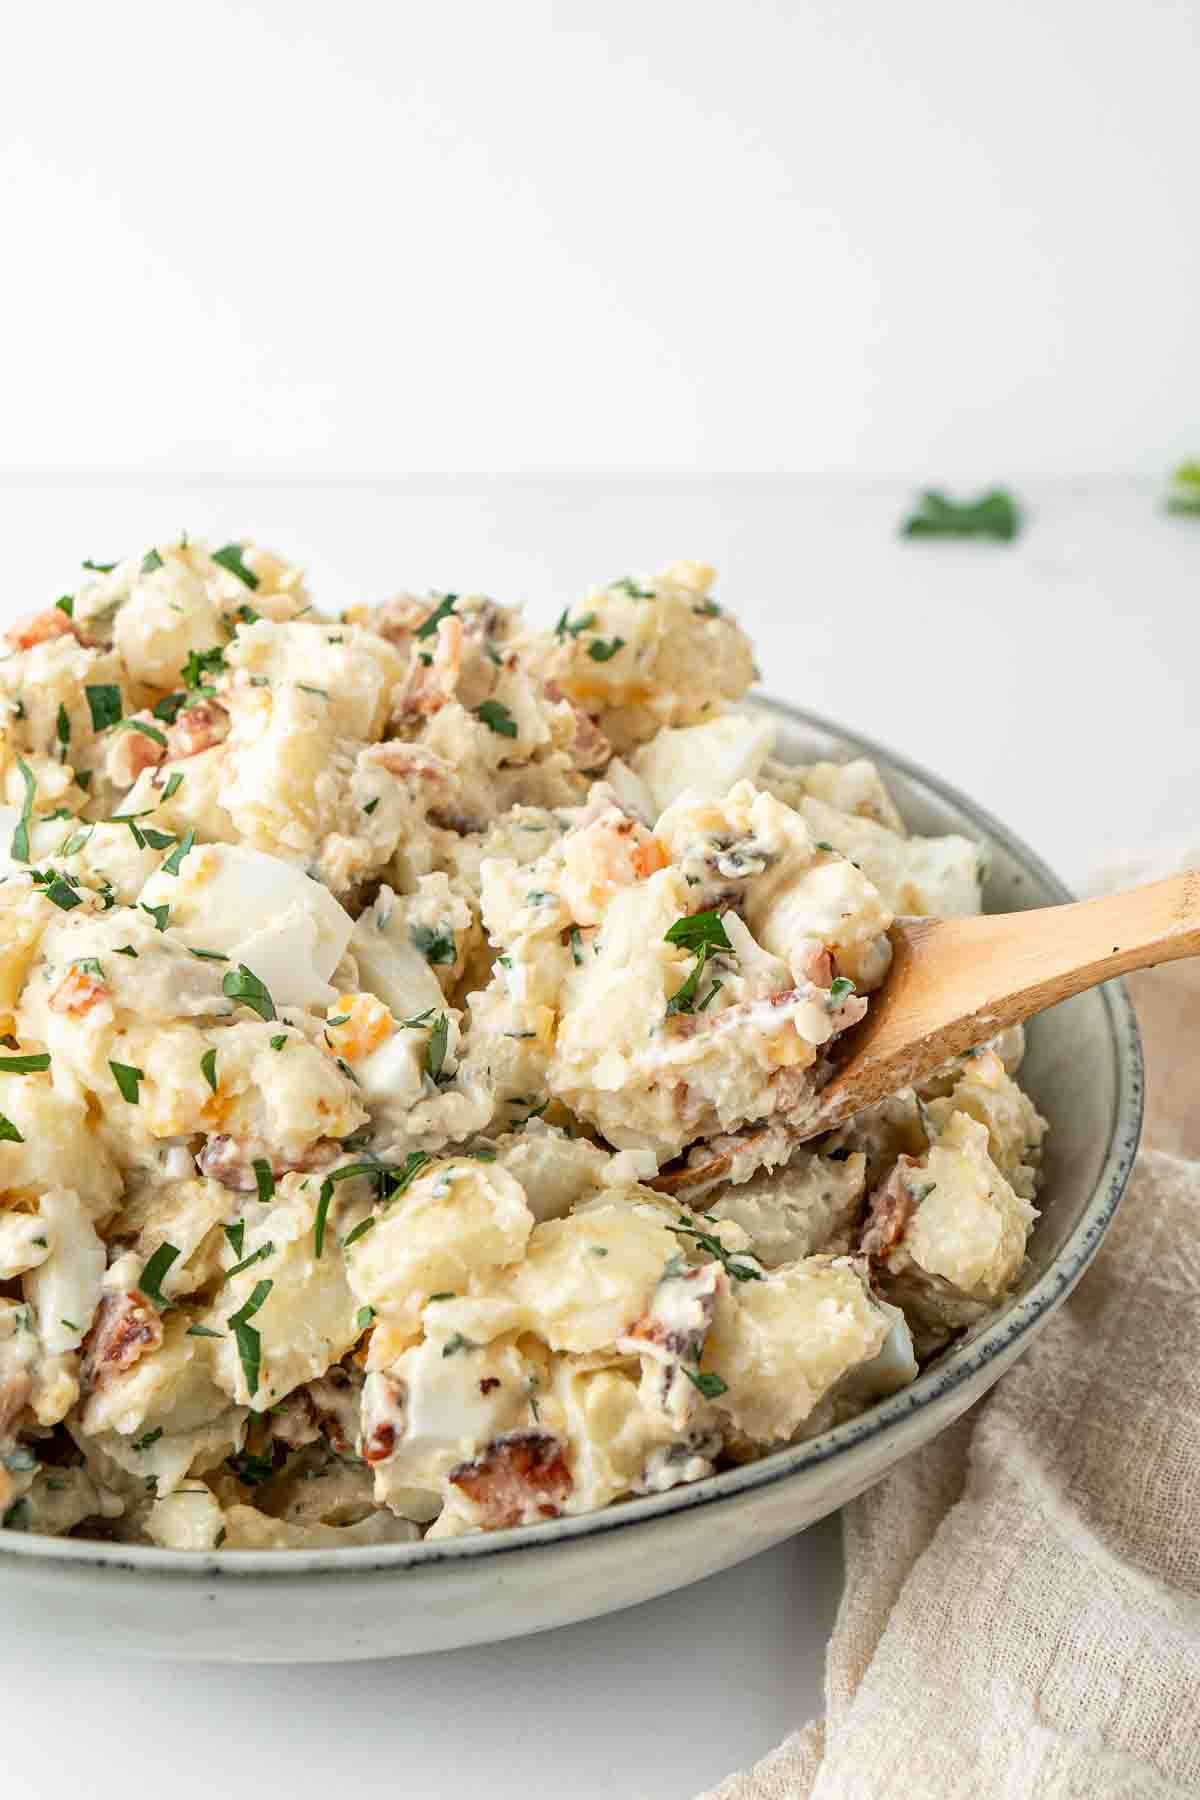 Wooden spoon serving potato salad from a bowl.